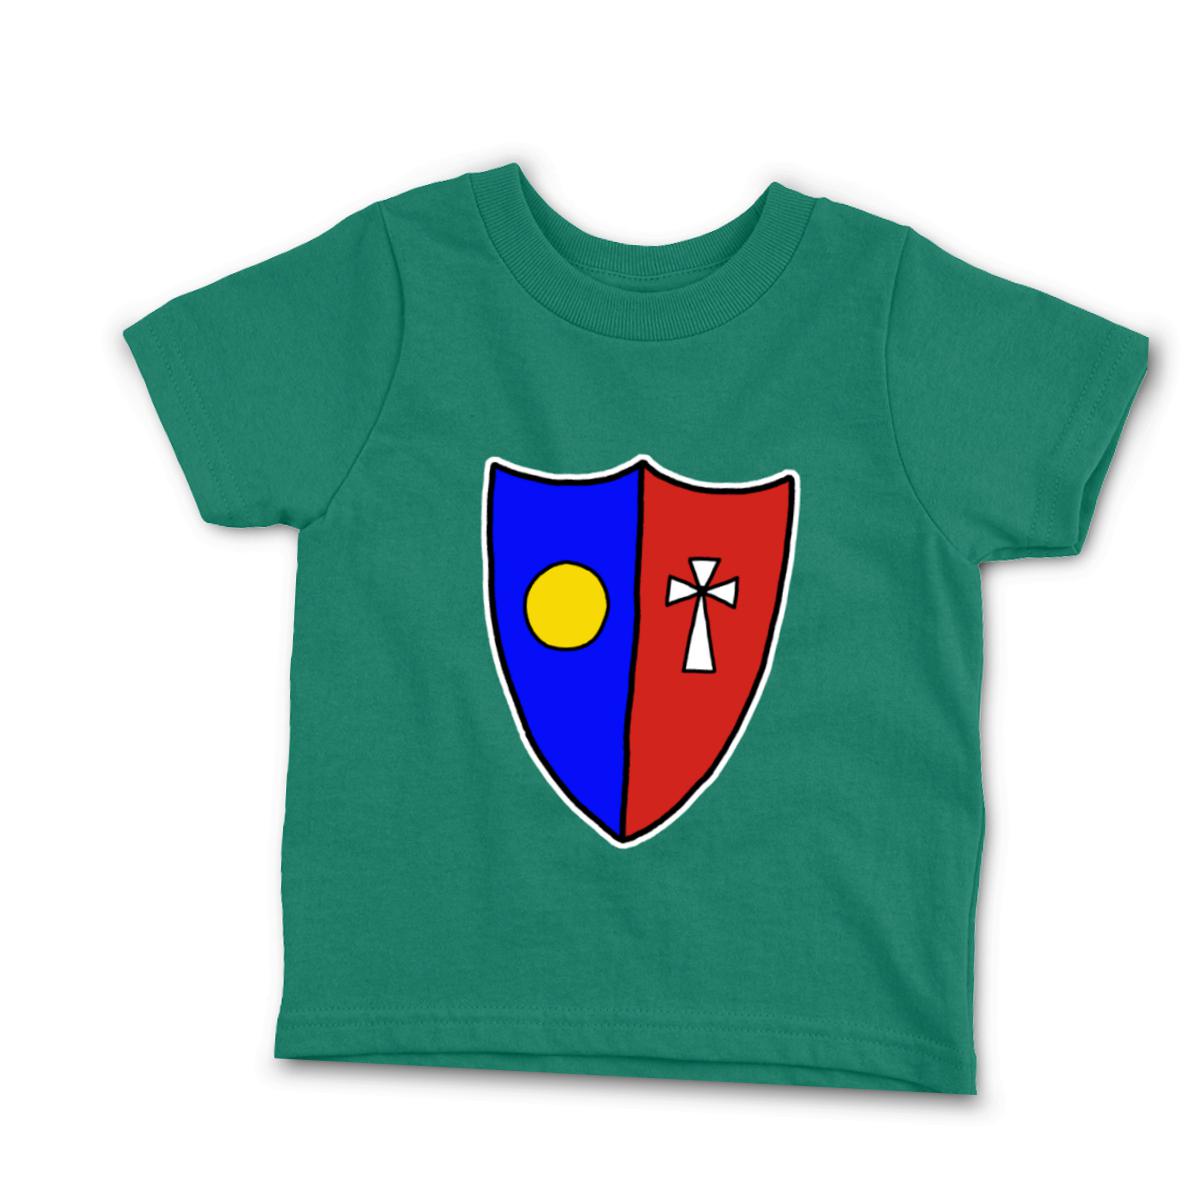 Shield Toddler Tee 4T kelly